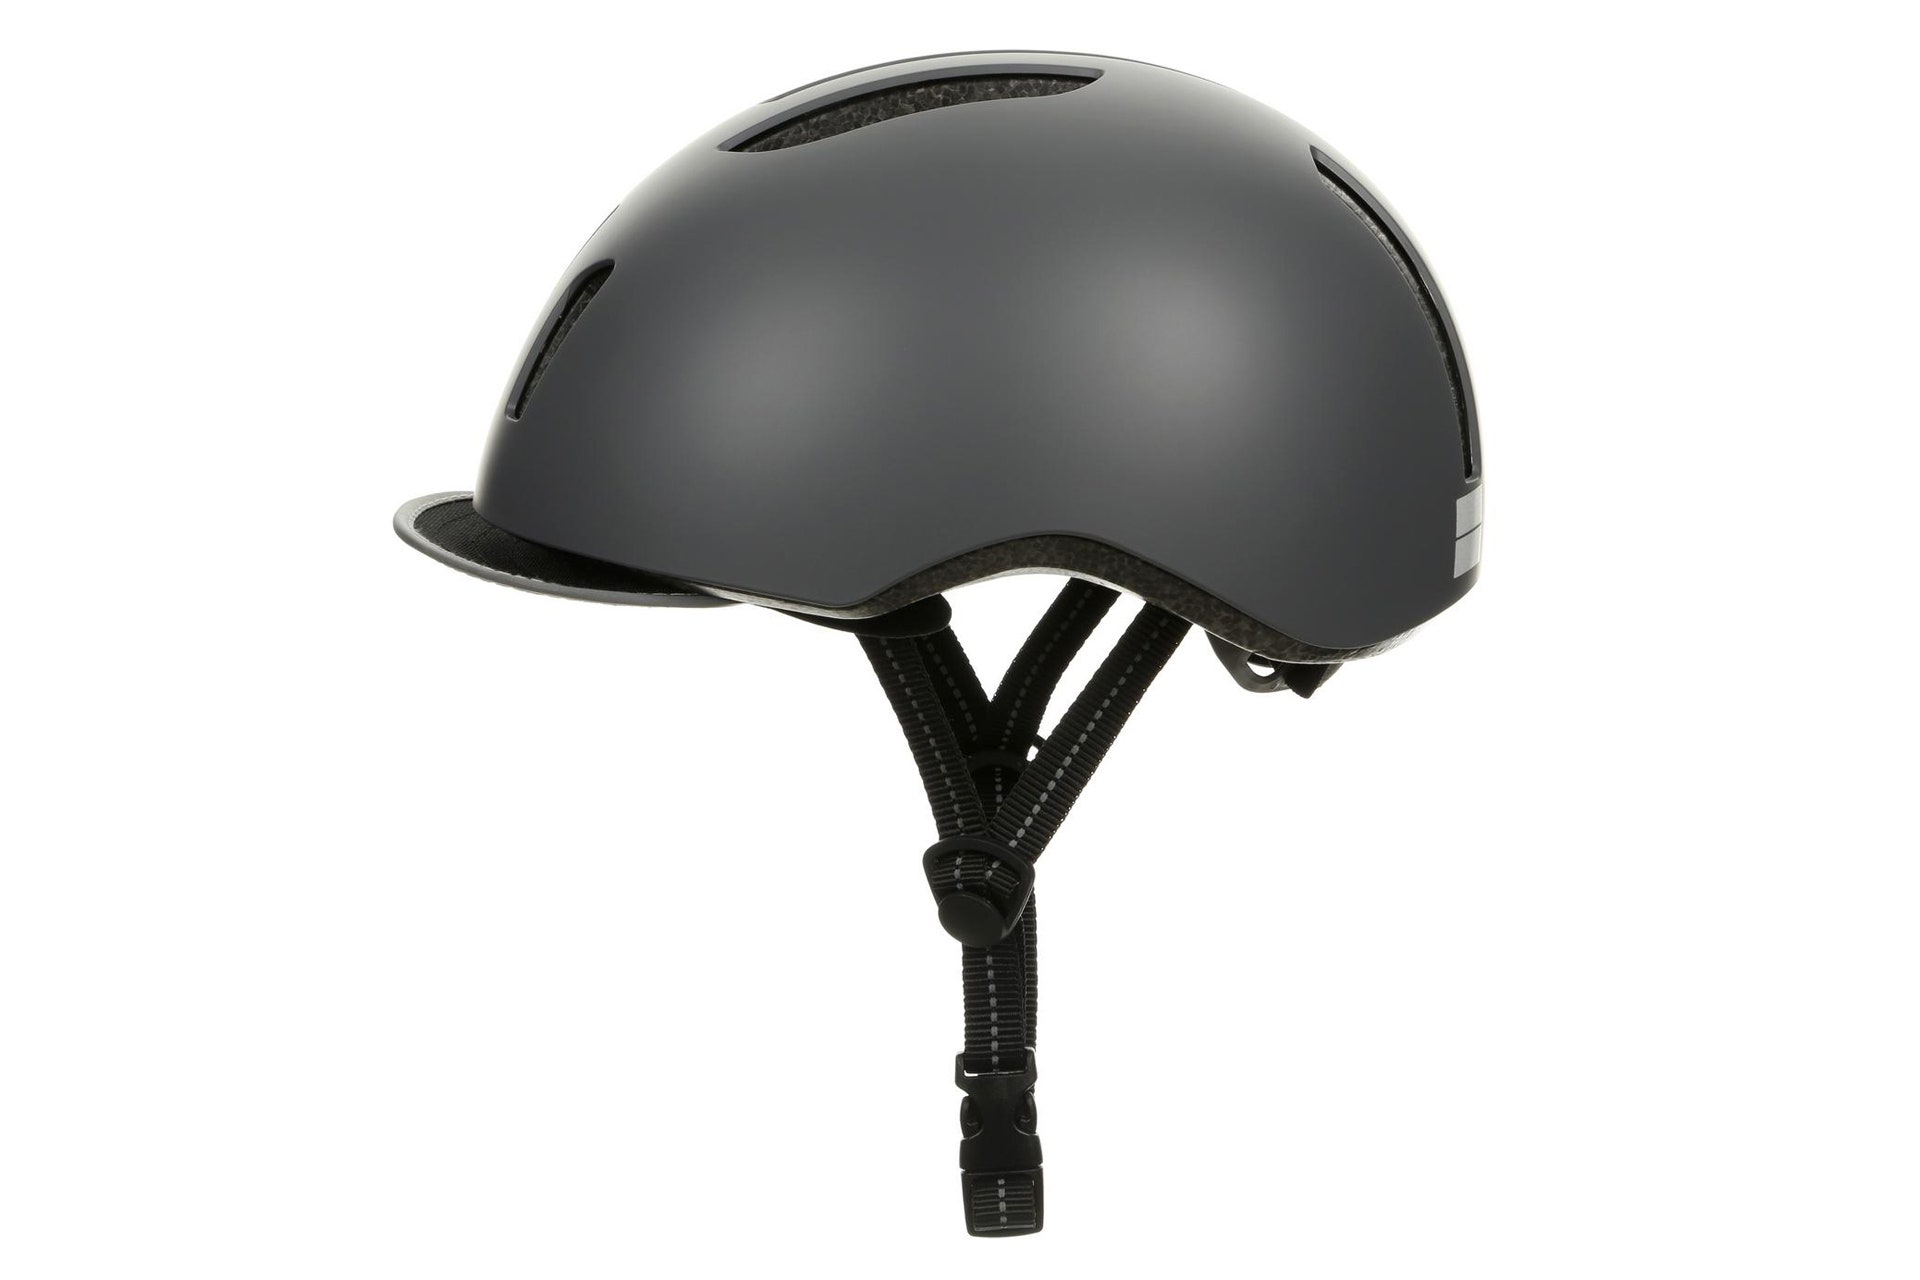 Detail Images Of Bicycle Helmets Nomer 35